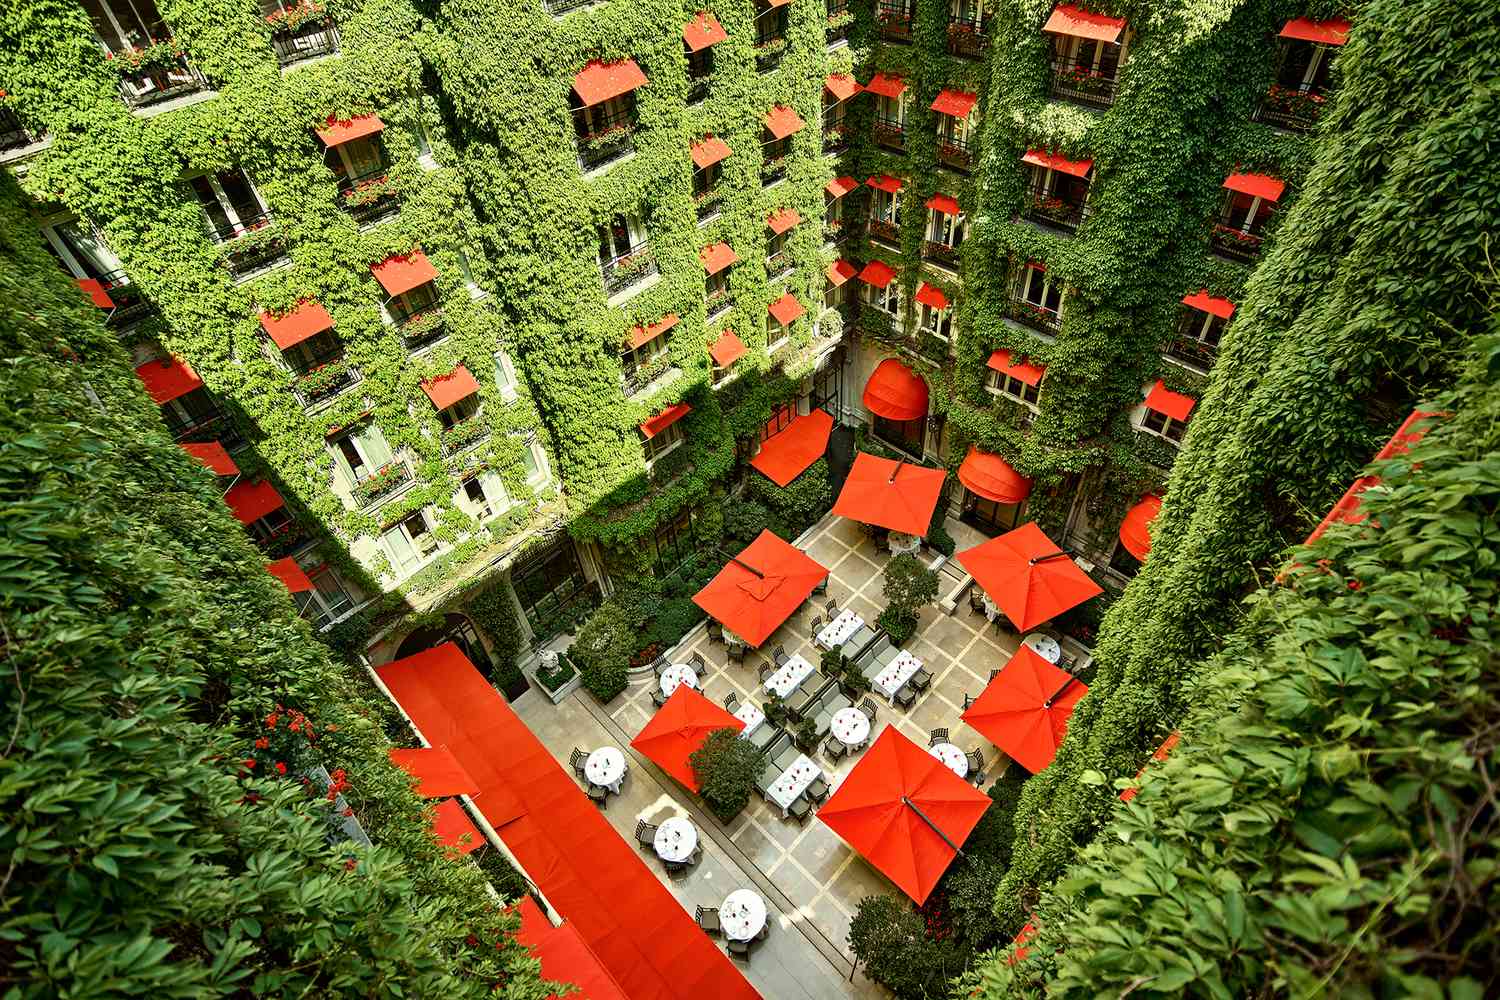 Ivy covered walls with view of outdoor dining at HÃ´tel Plaza AthÃ©nÃ©e